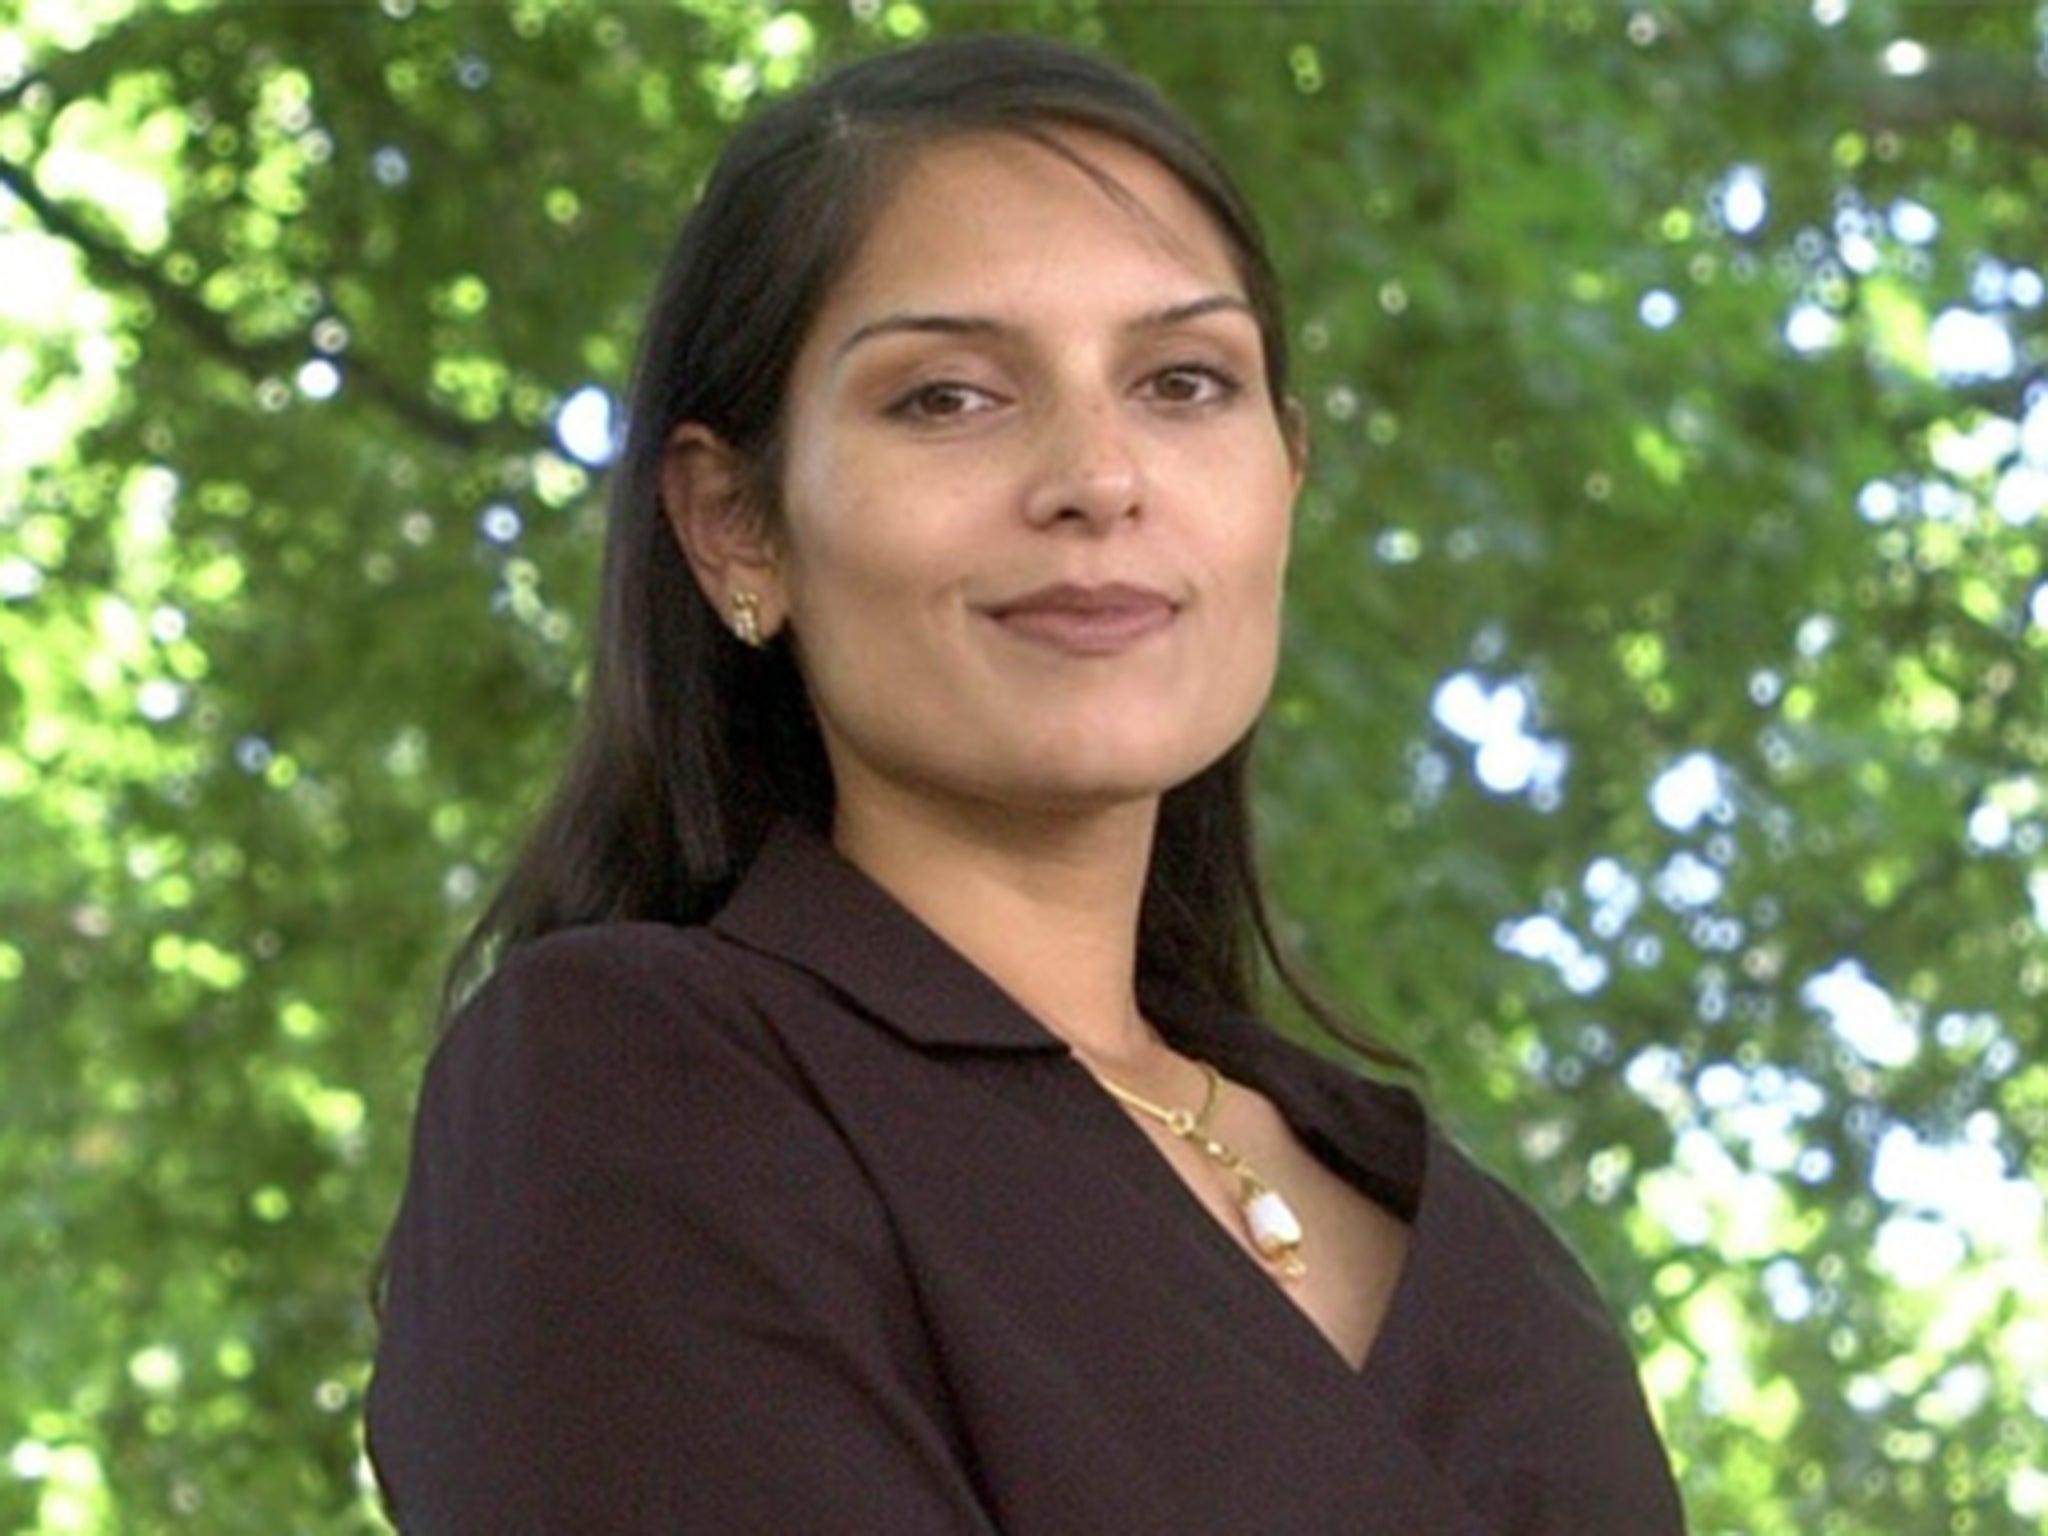 Priti Patel MP: Who is the new Treasury minister who supports death penalty and rejects plain packaging for cigarettes? - Priti_Patel_MP